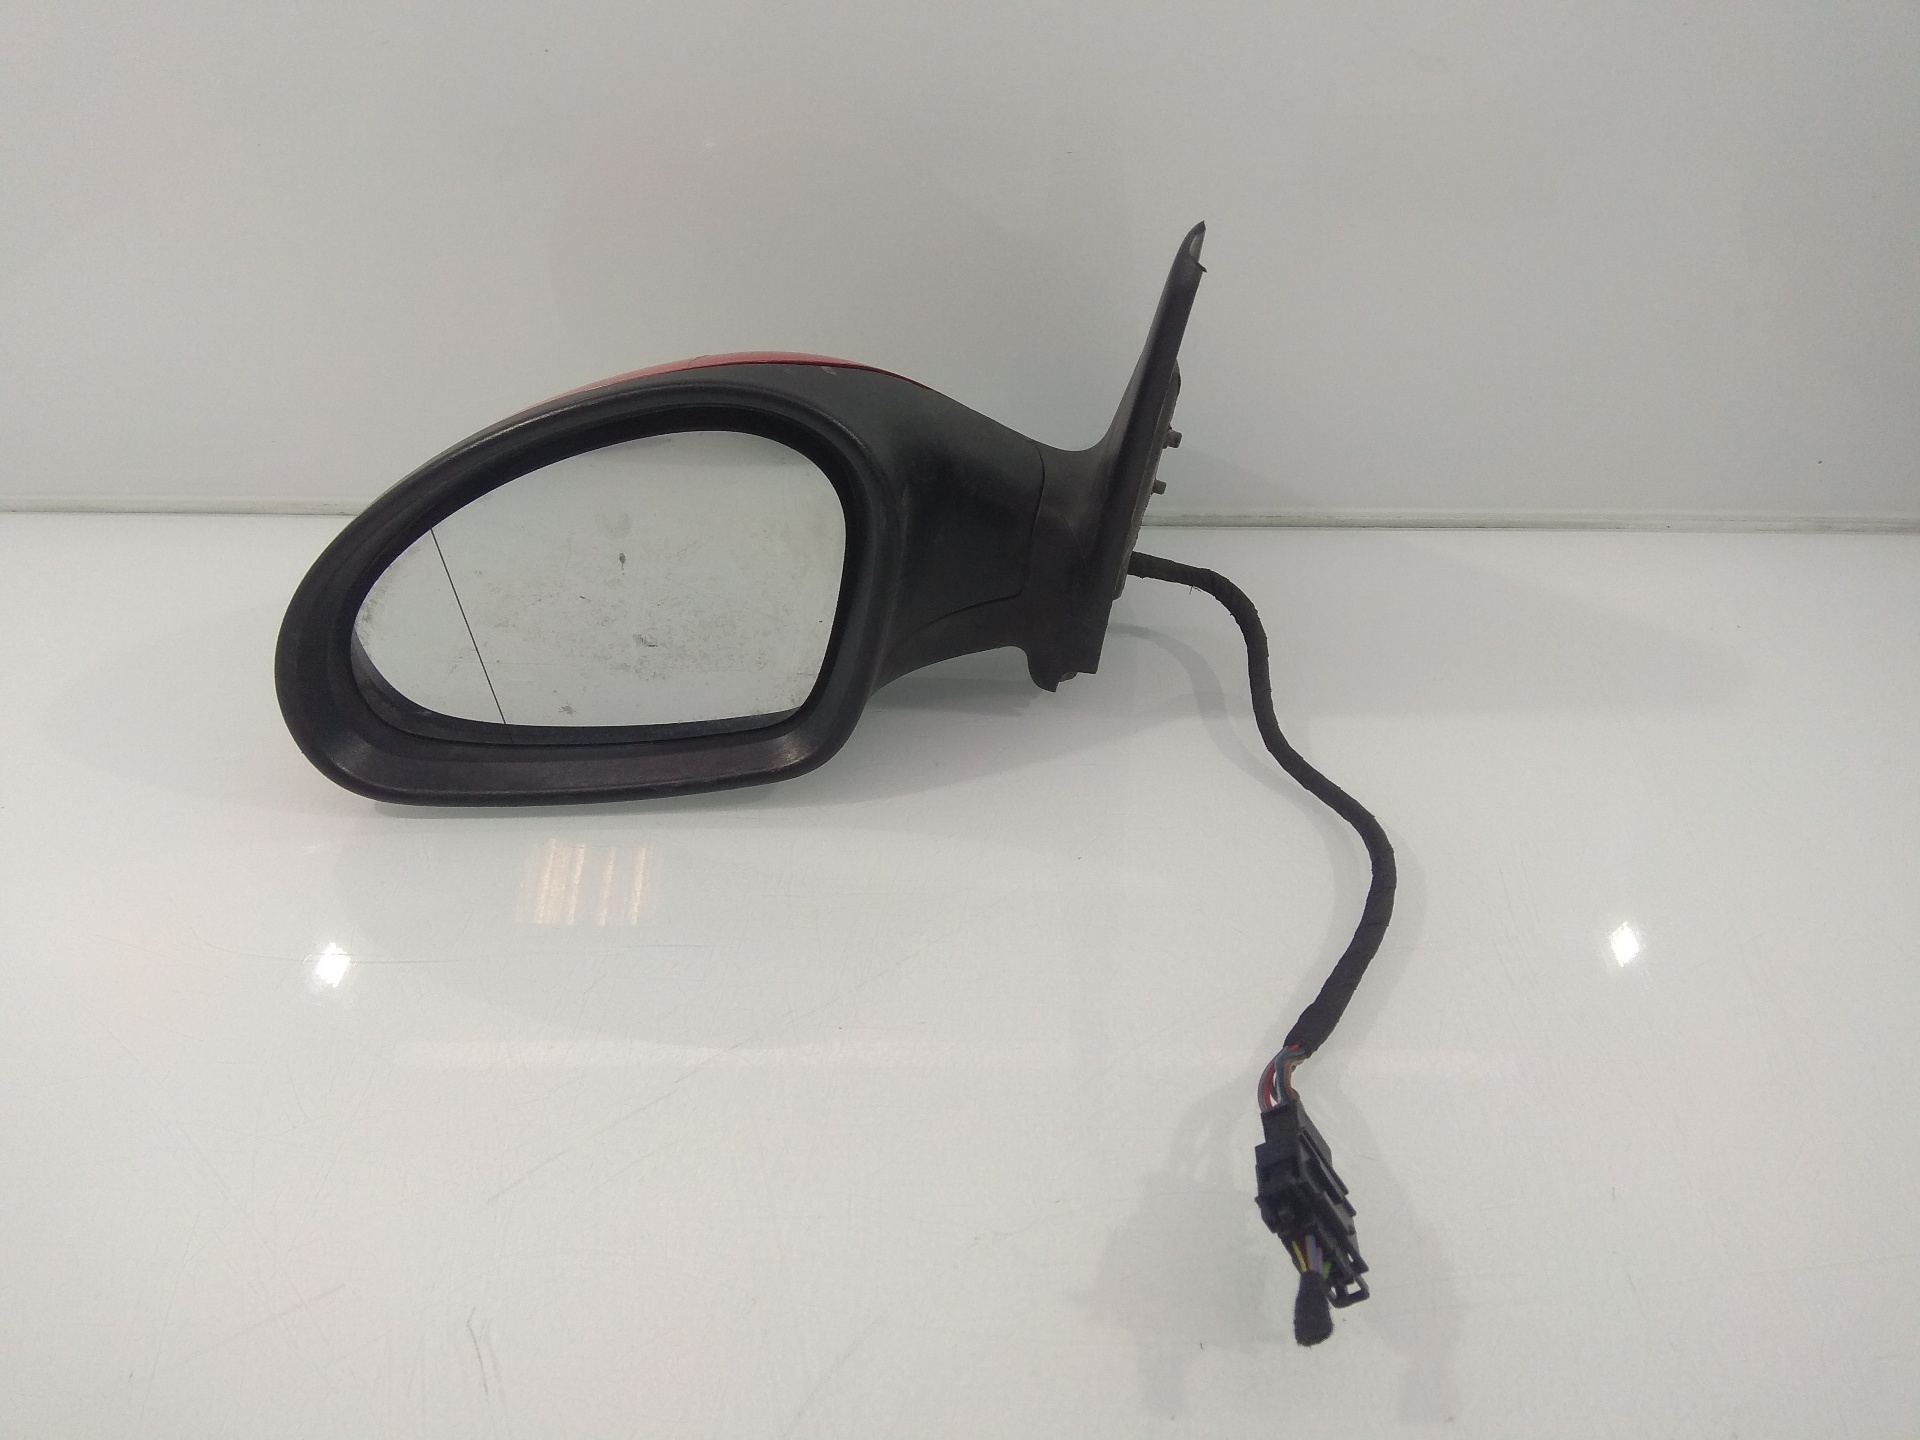 SEAT Leon 1 generation (1999-2005) Left Side Wing Mirror 1M0857933A, ELECTRICO9CABLES, ROJOFASEII 19226136